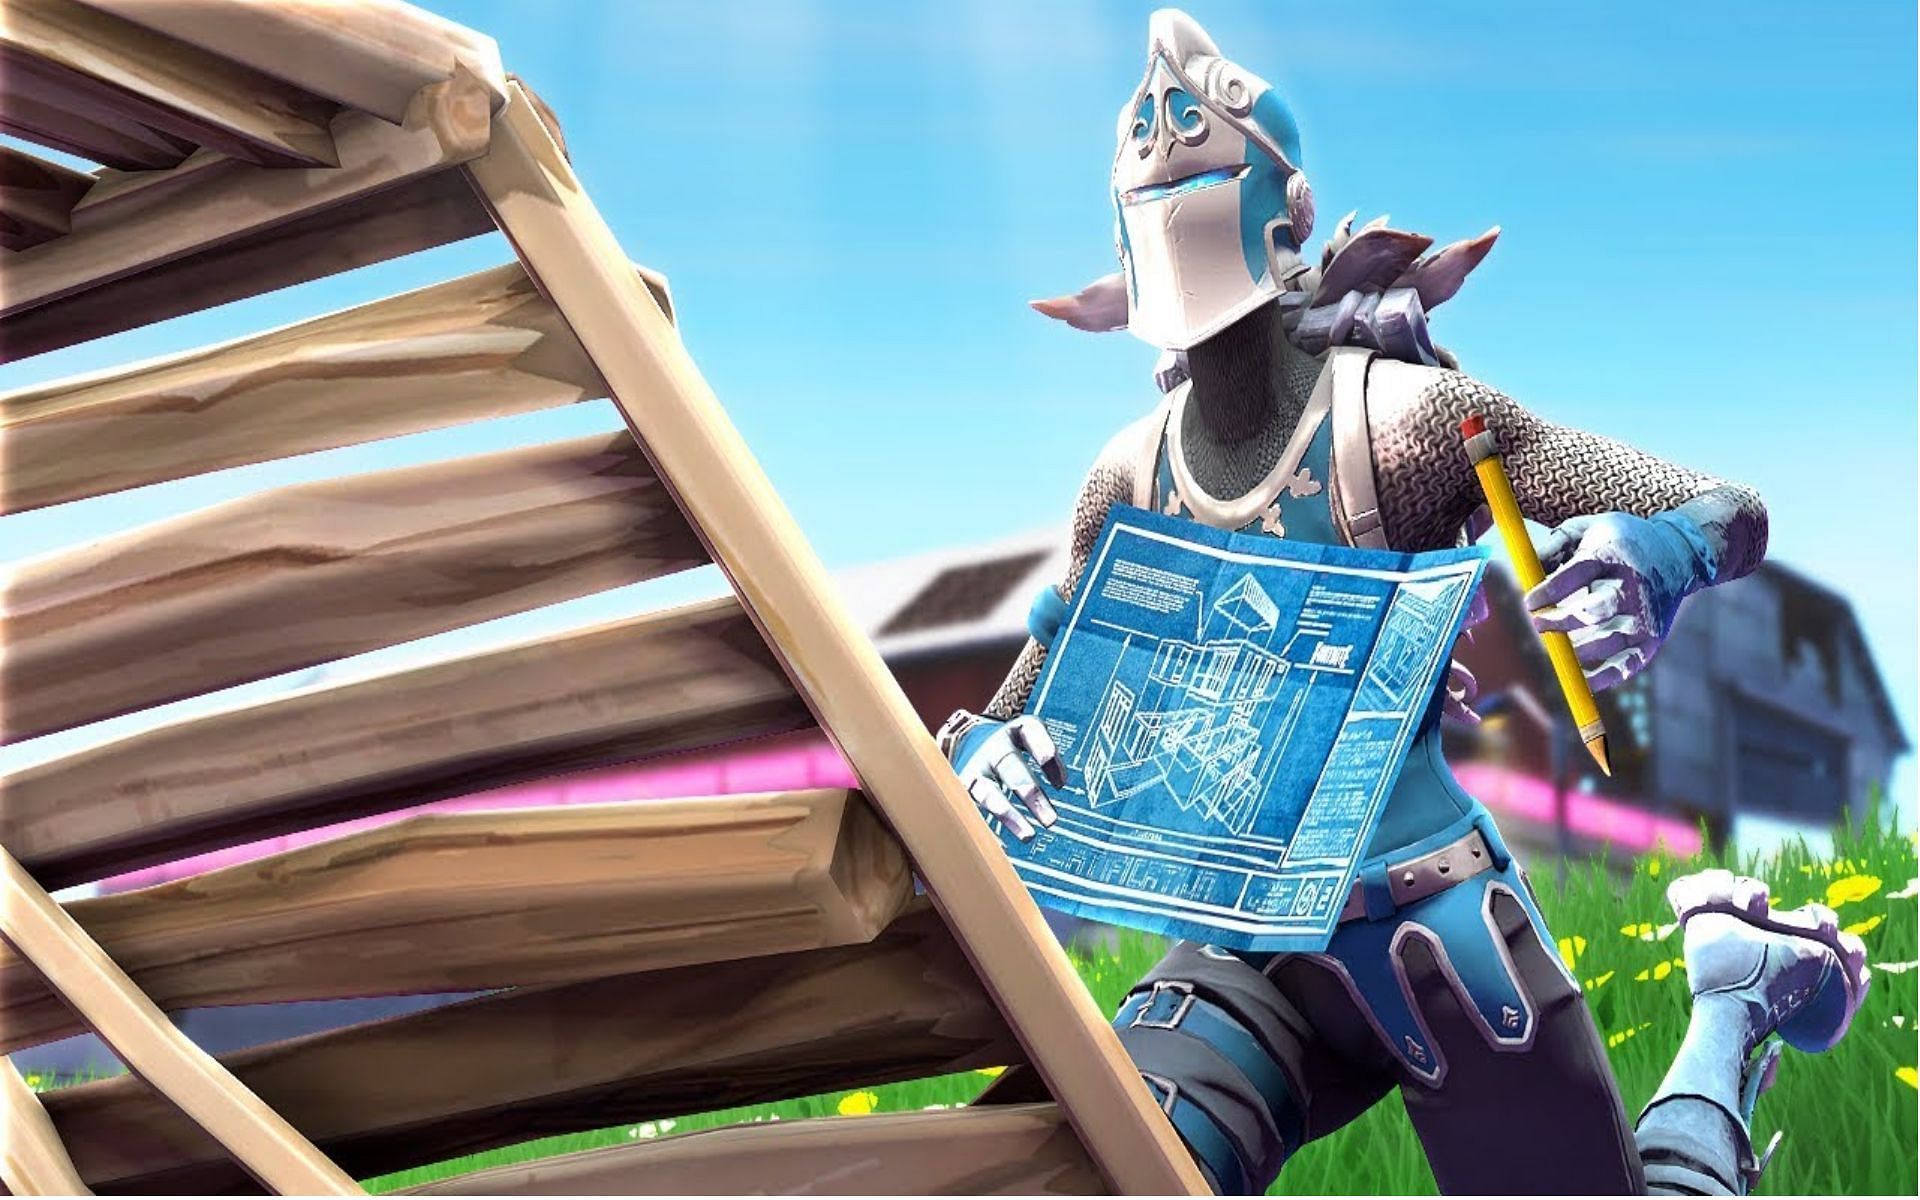 Fortnite glitch allows gamers to build exceptional structures in the game (Image via YouTube/Ninja)